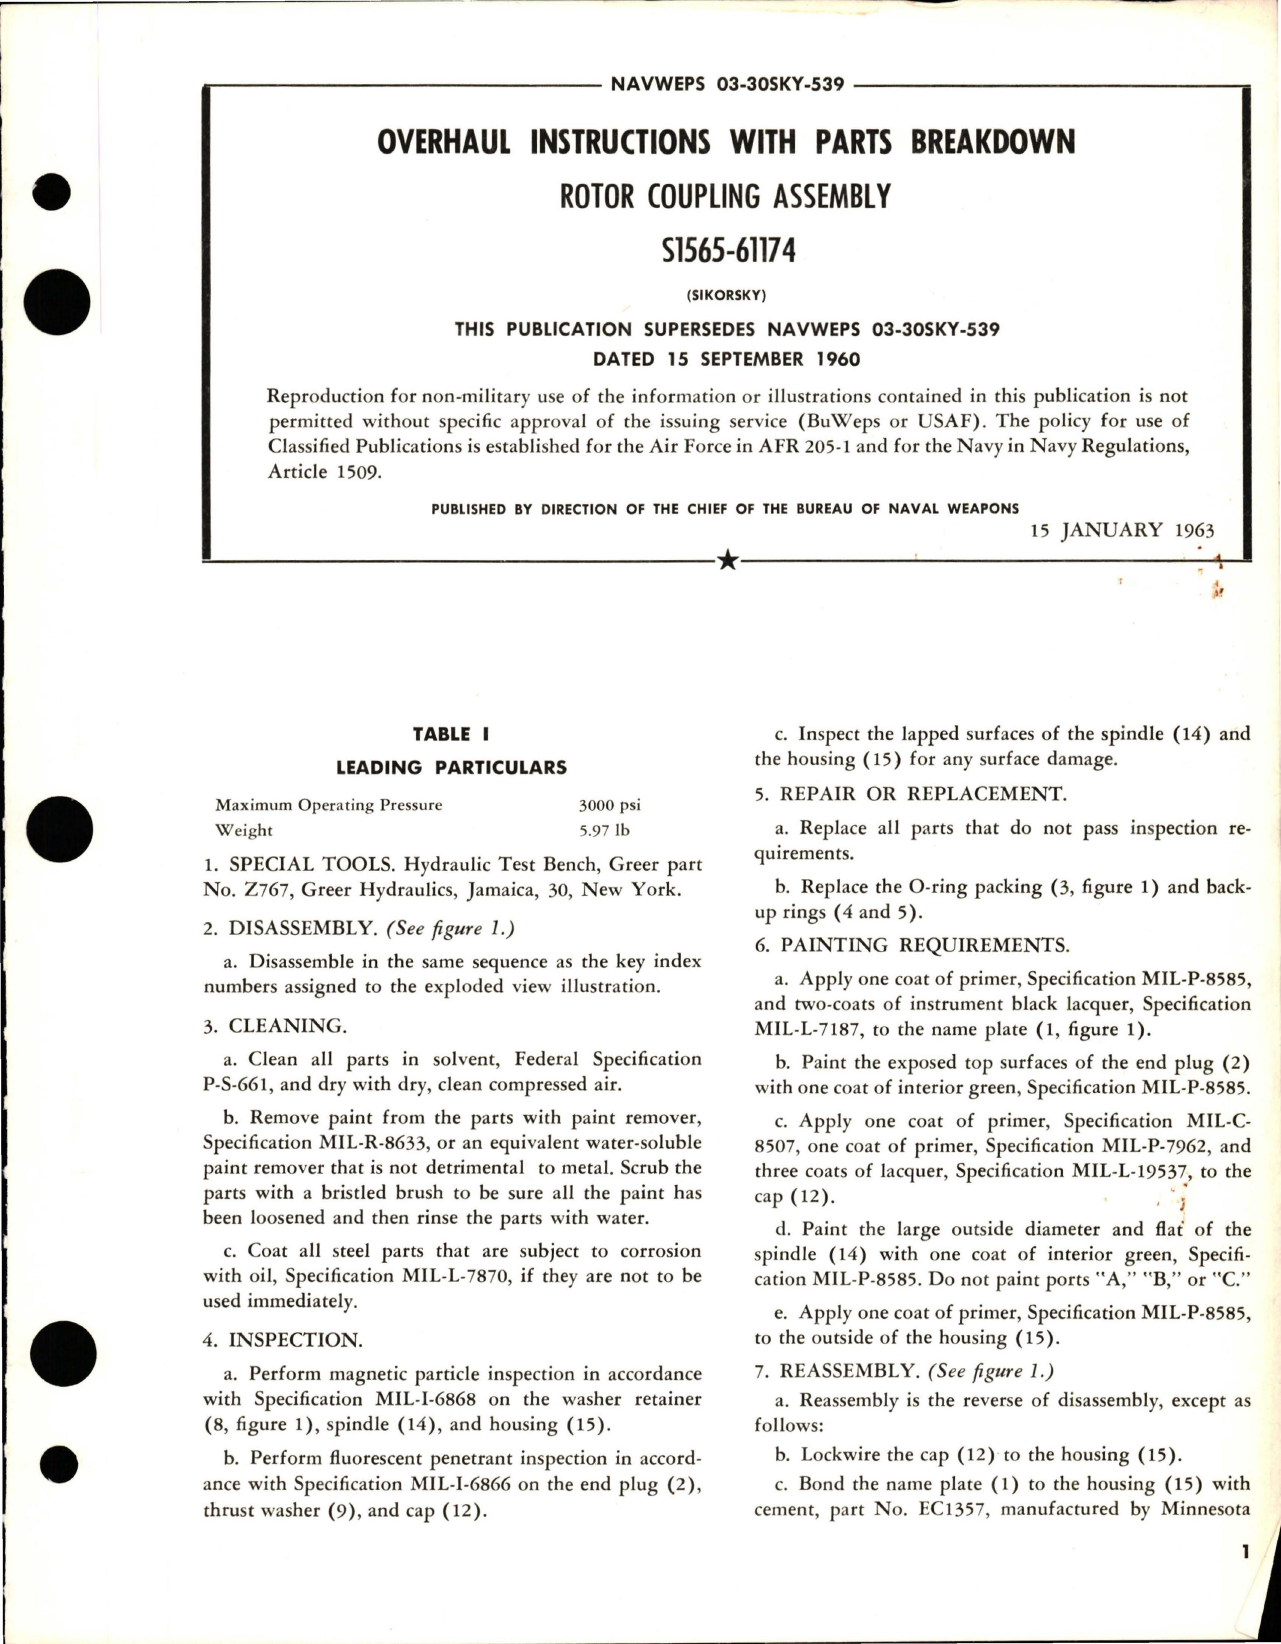 Sample page 1 from AirCorps Library document: Overhaul Instructions with Parts Breakdown for Rotor Coupling Assembly - S1565-61174 